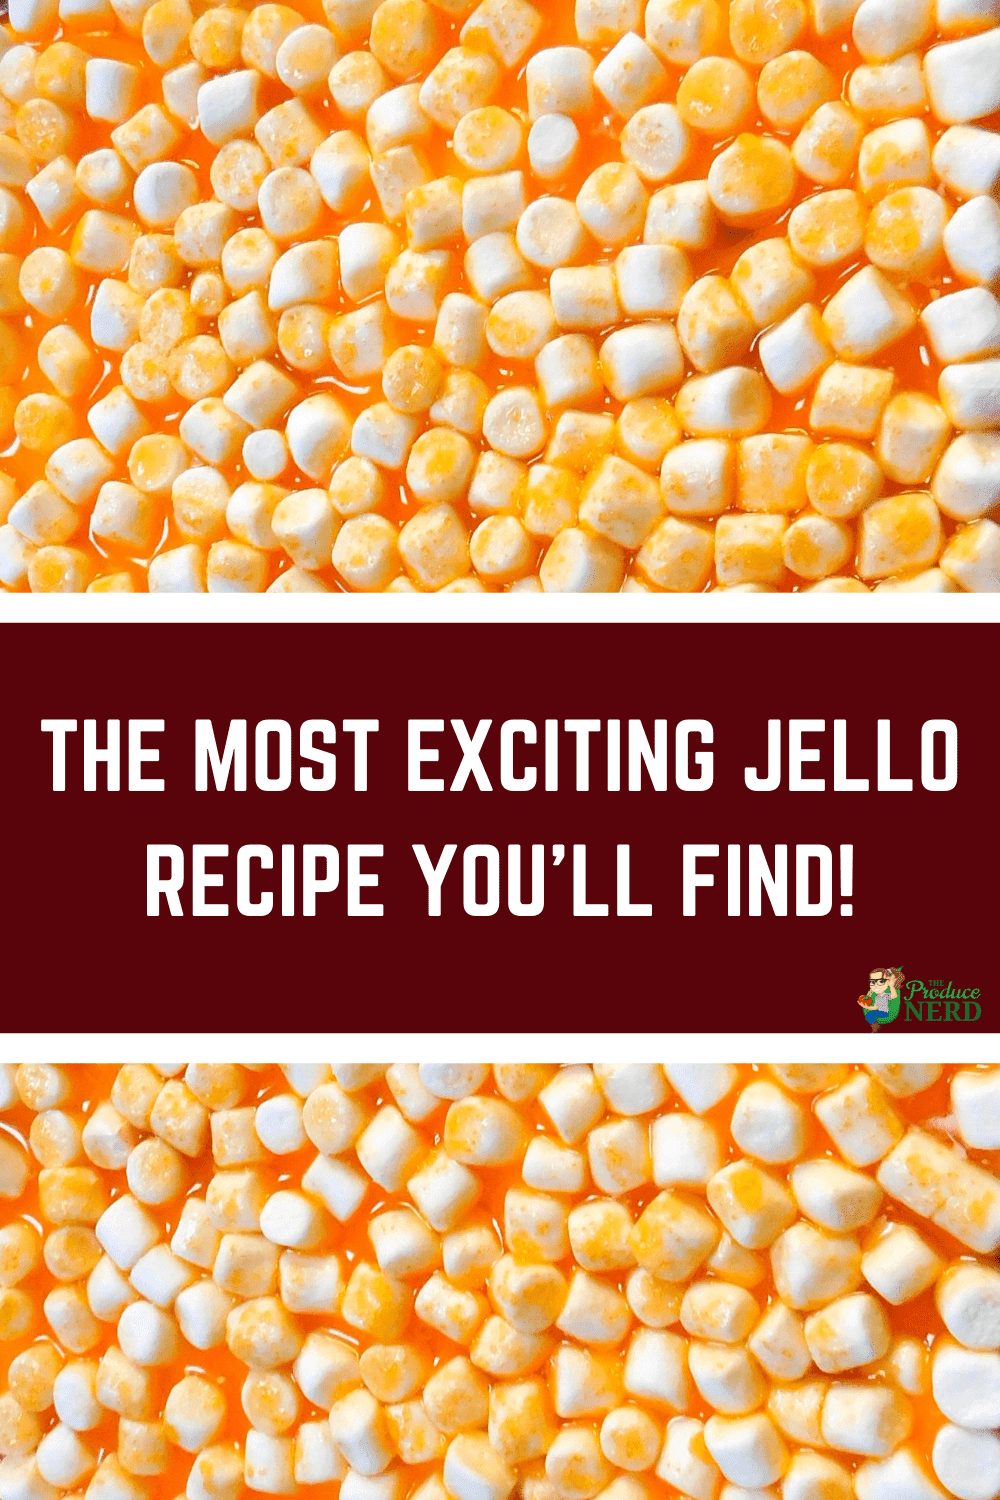 You are currently viewing Produce-Inspired Jello Recipe!